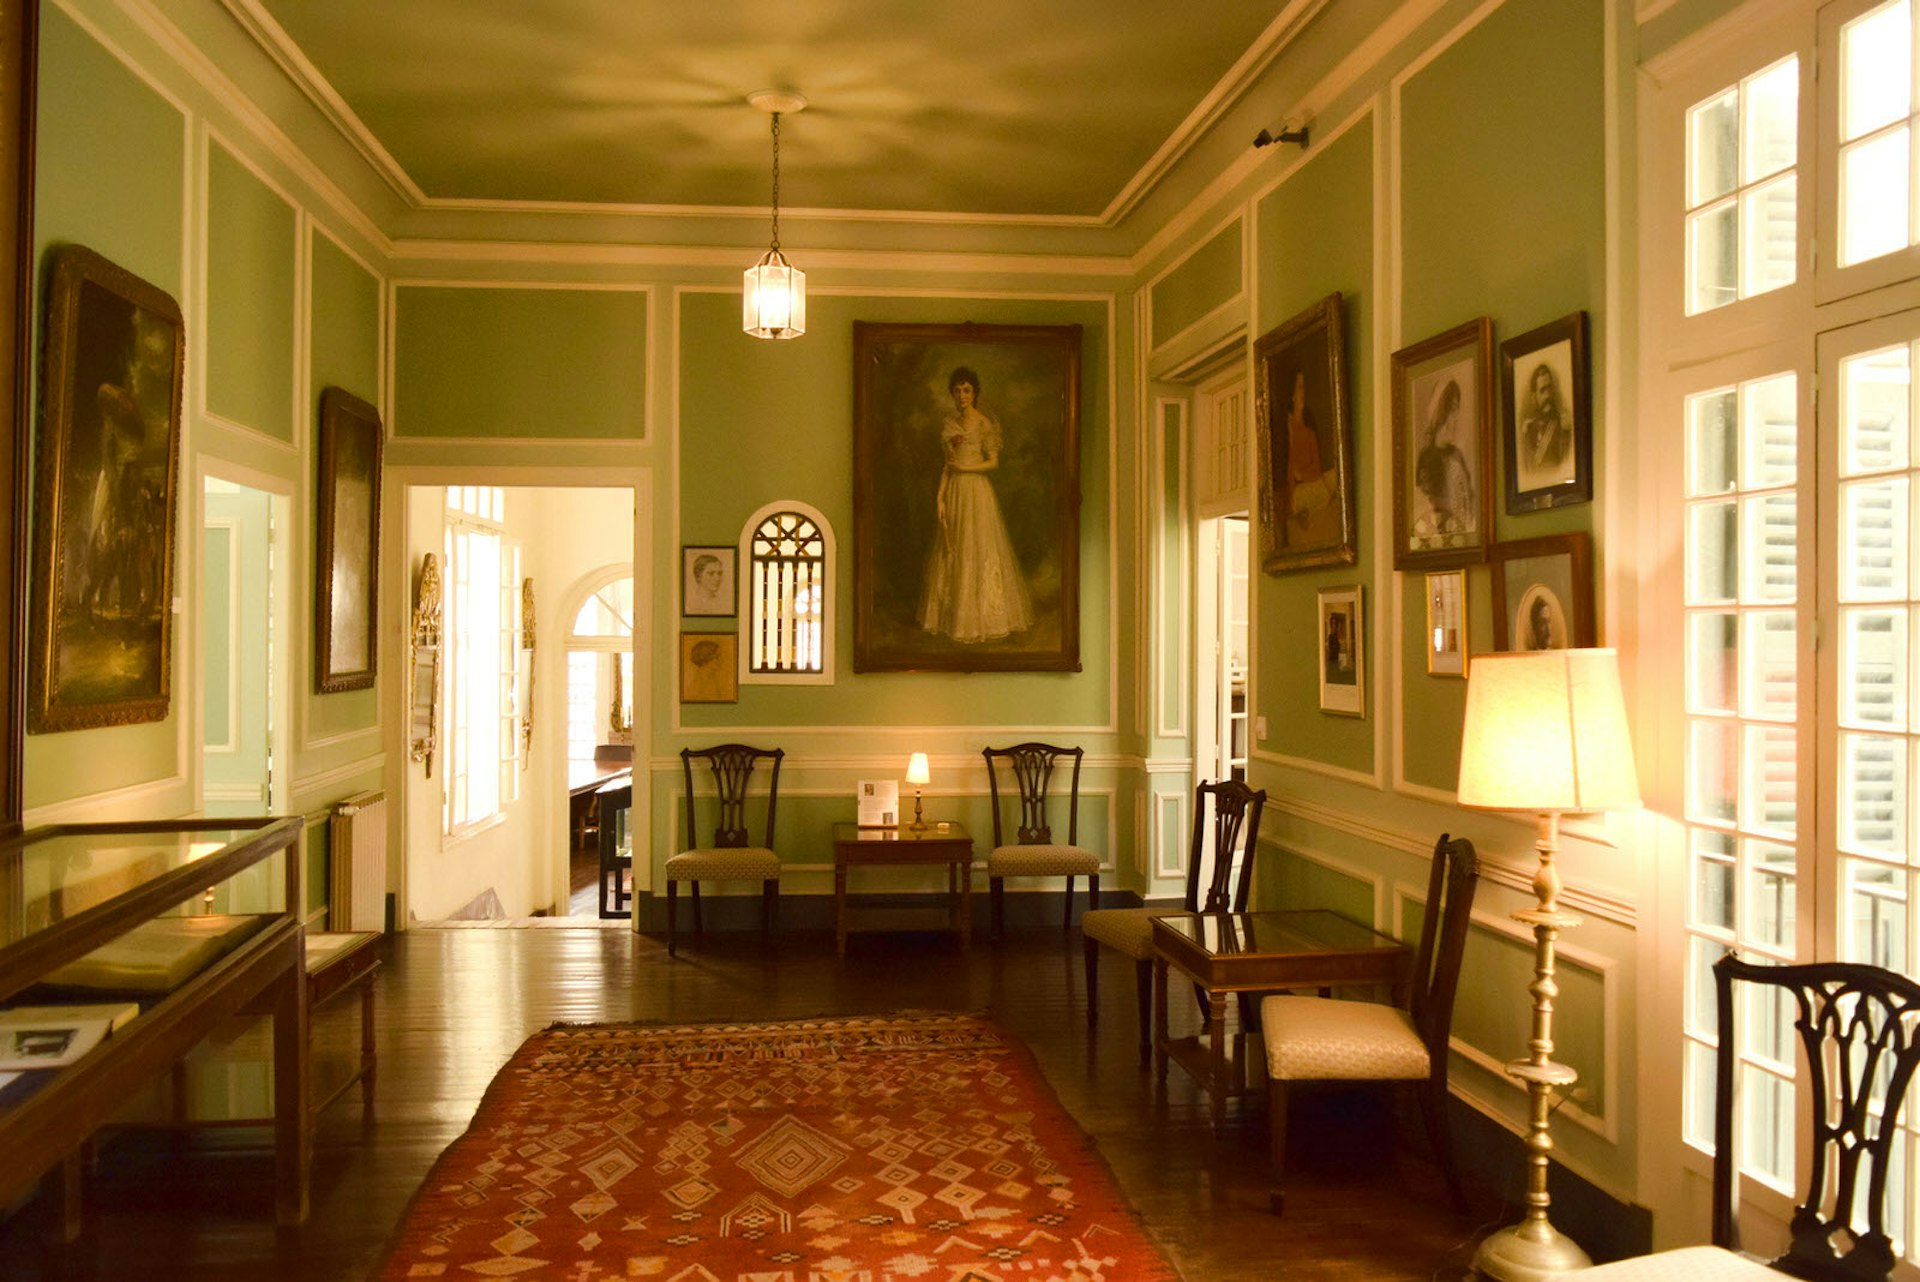 One of the inner rooms of the Tangier American Legation Museum is structured in a Victorian-era interior yet a traditional Moroccan rug remains.